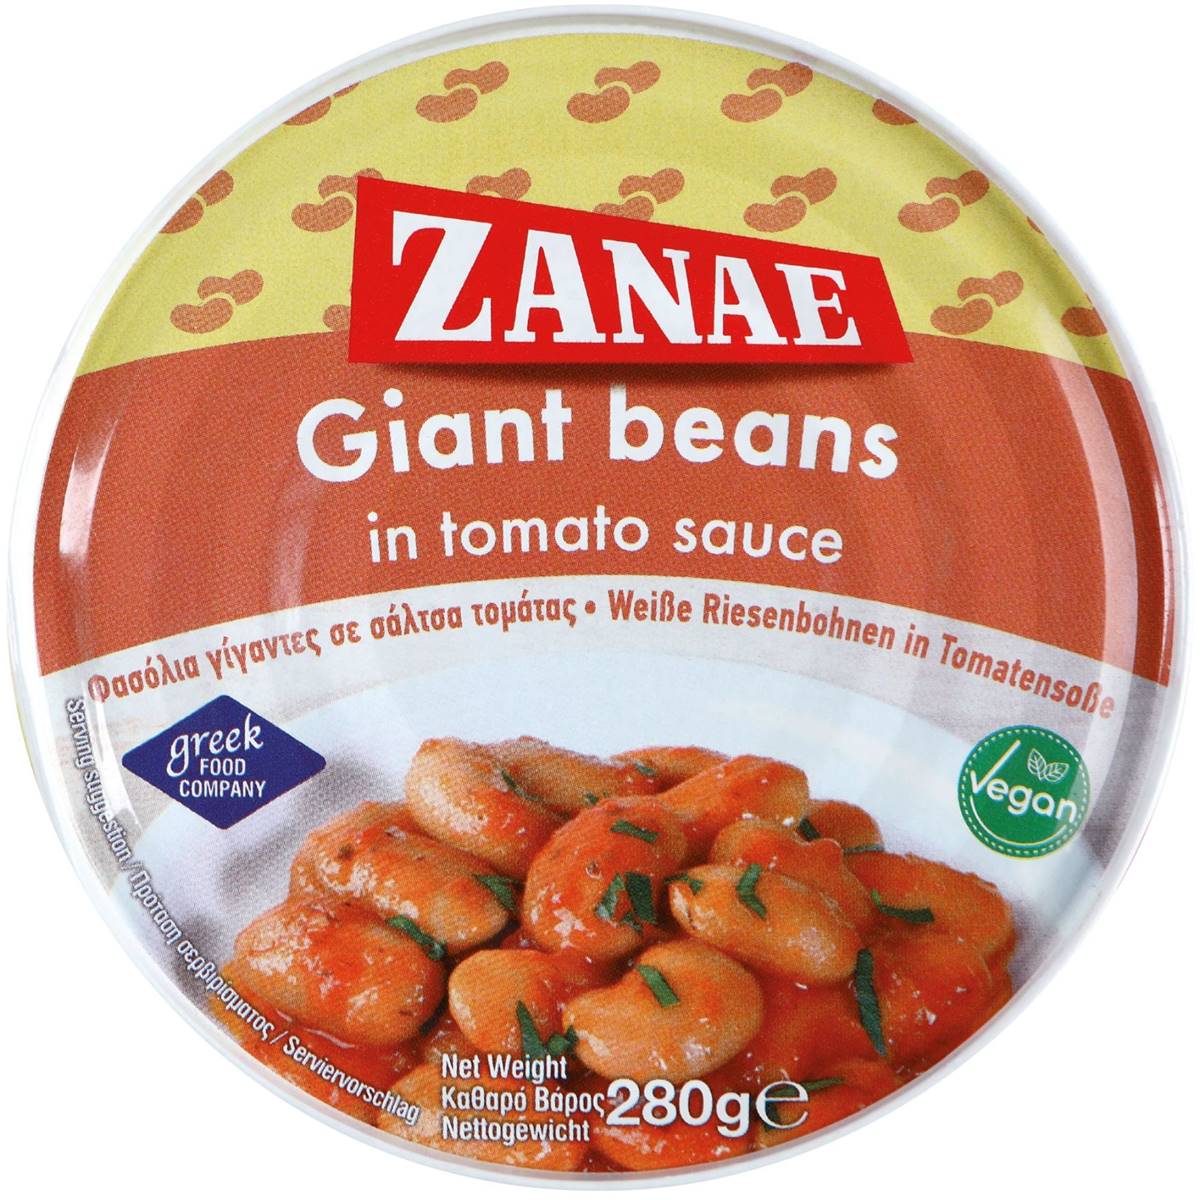 Calories in Zanae Giant Beans In Tomato Sauce